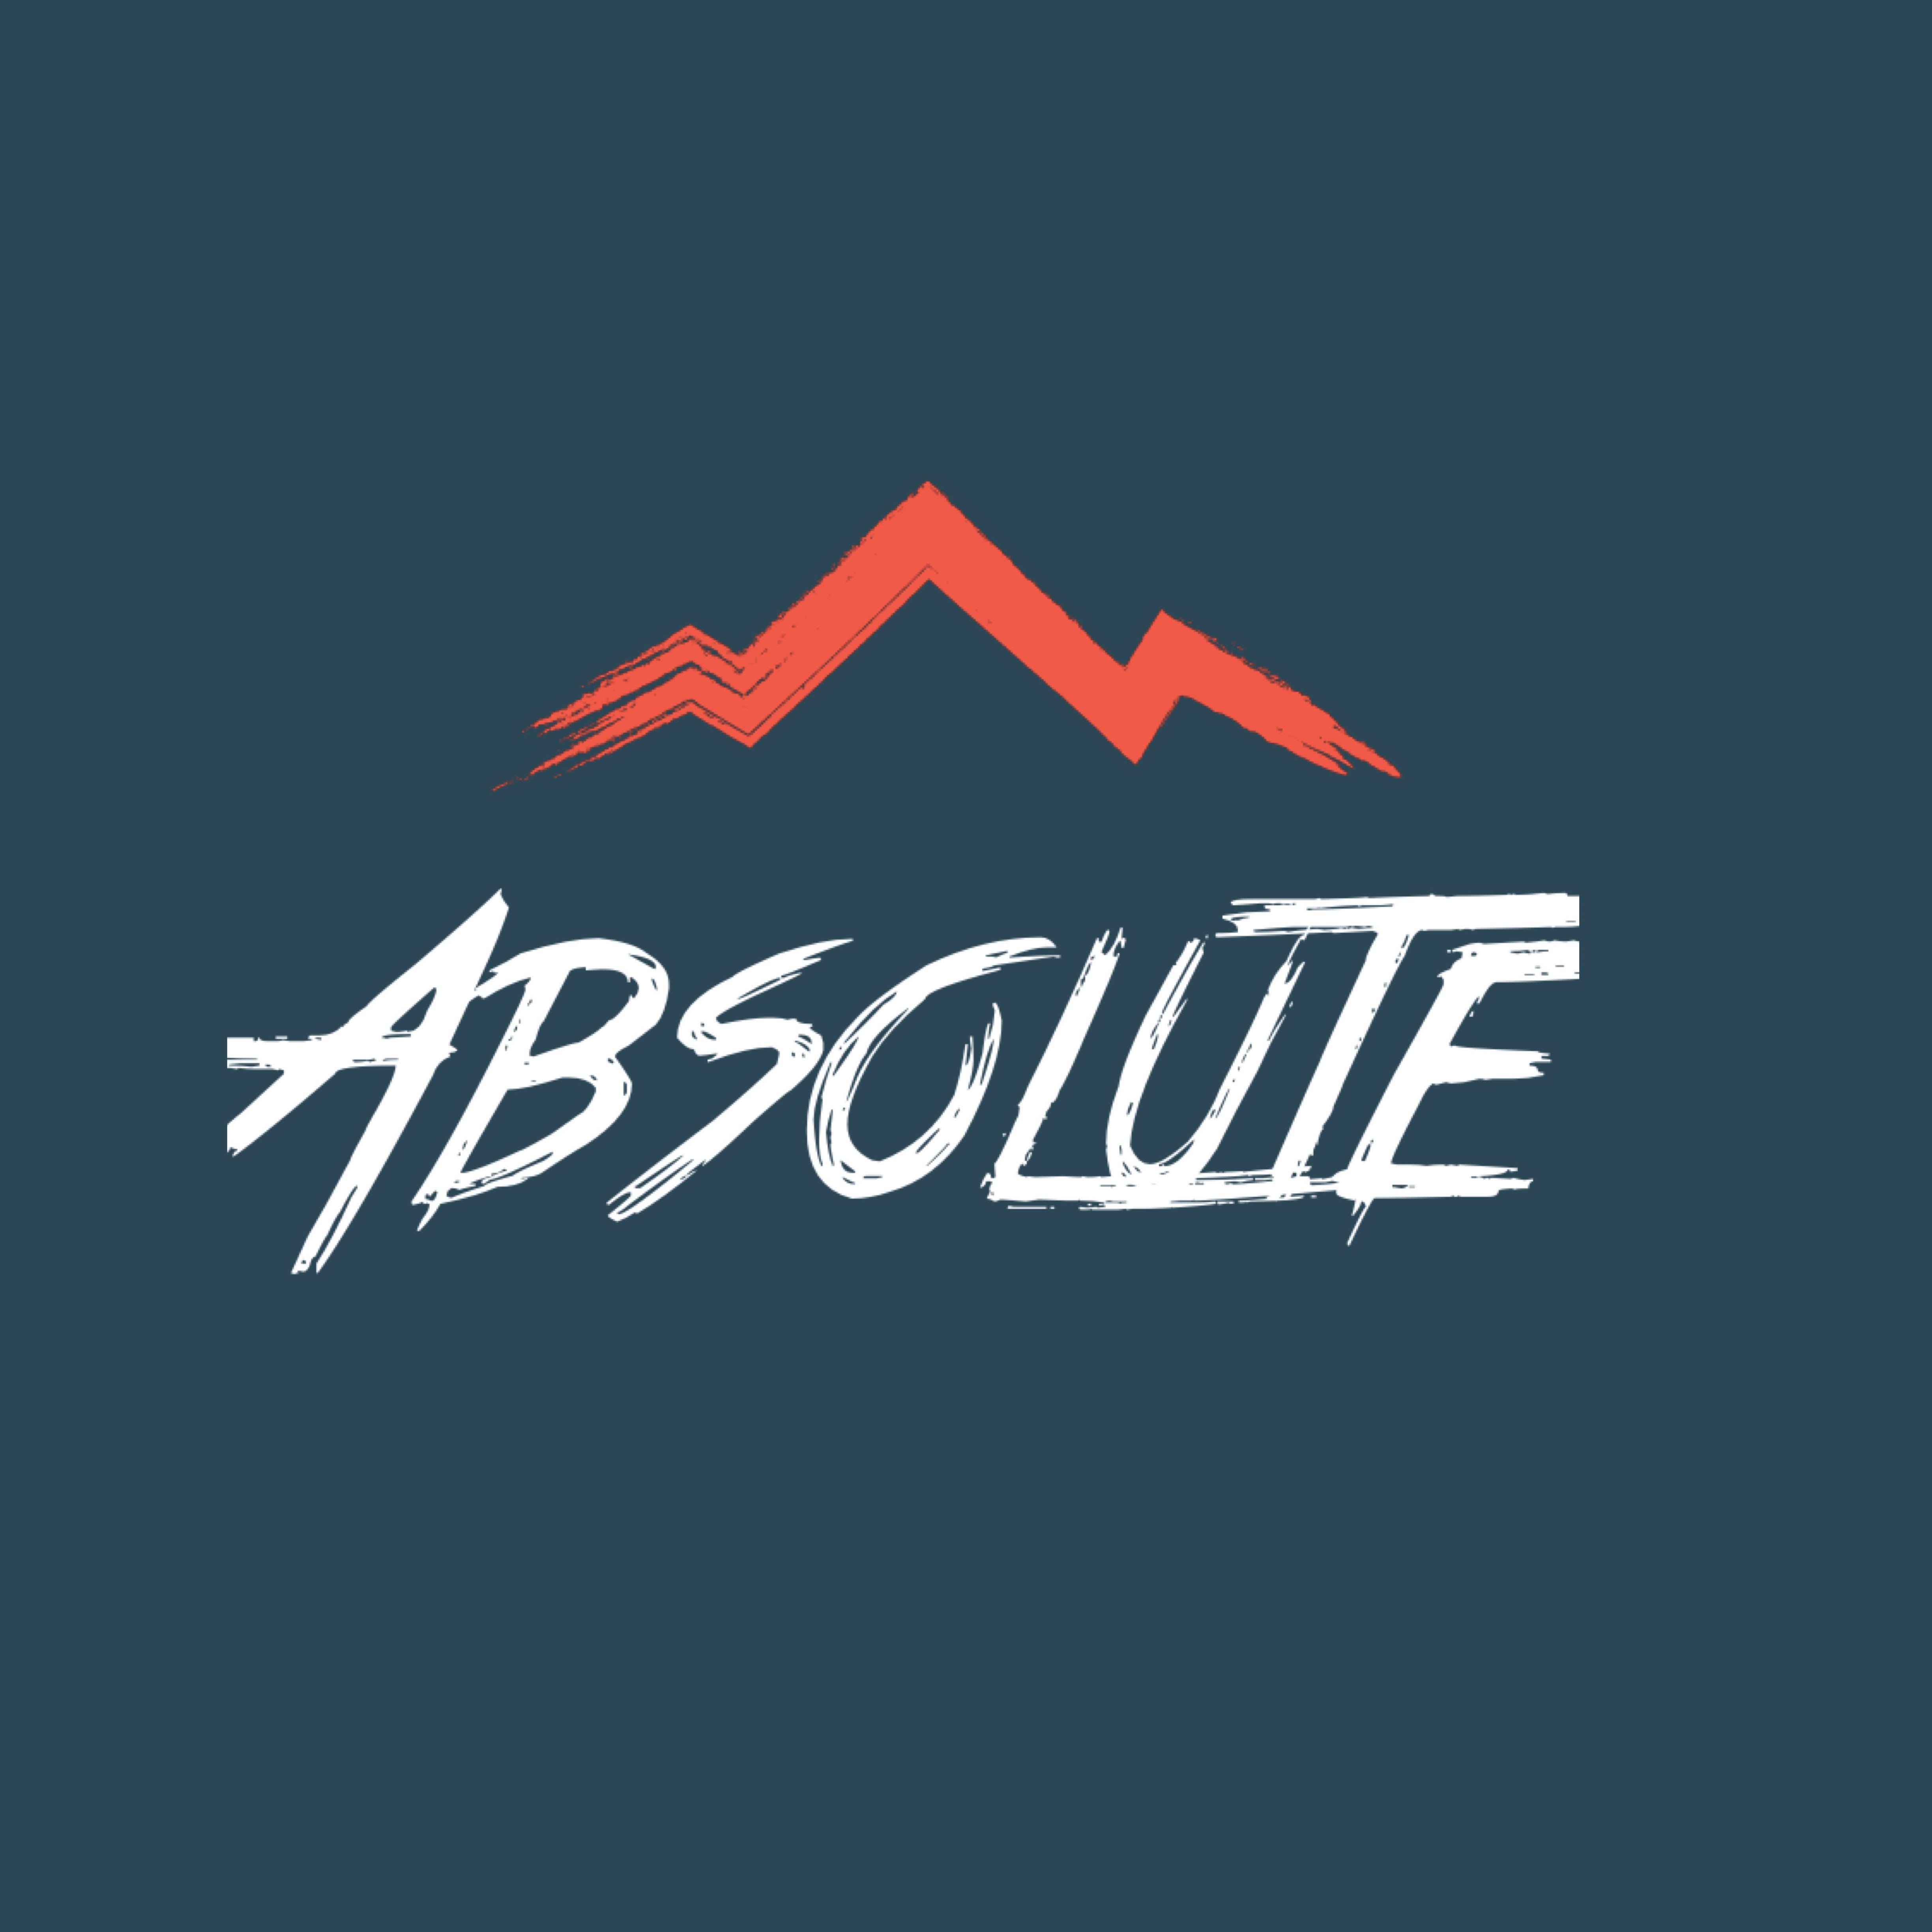 ABSOLUTE